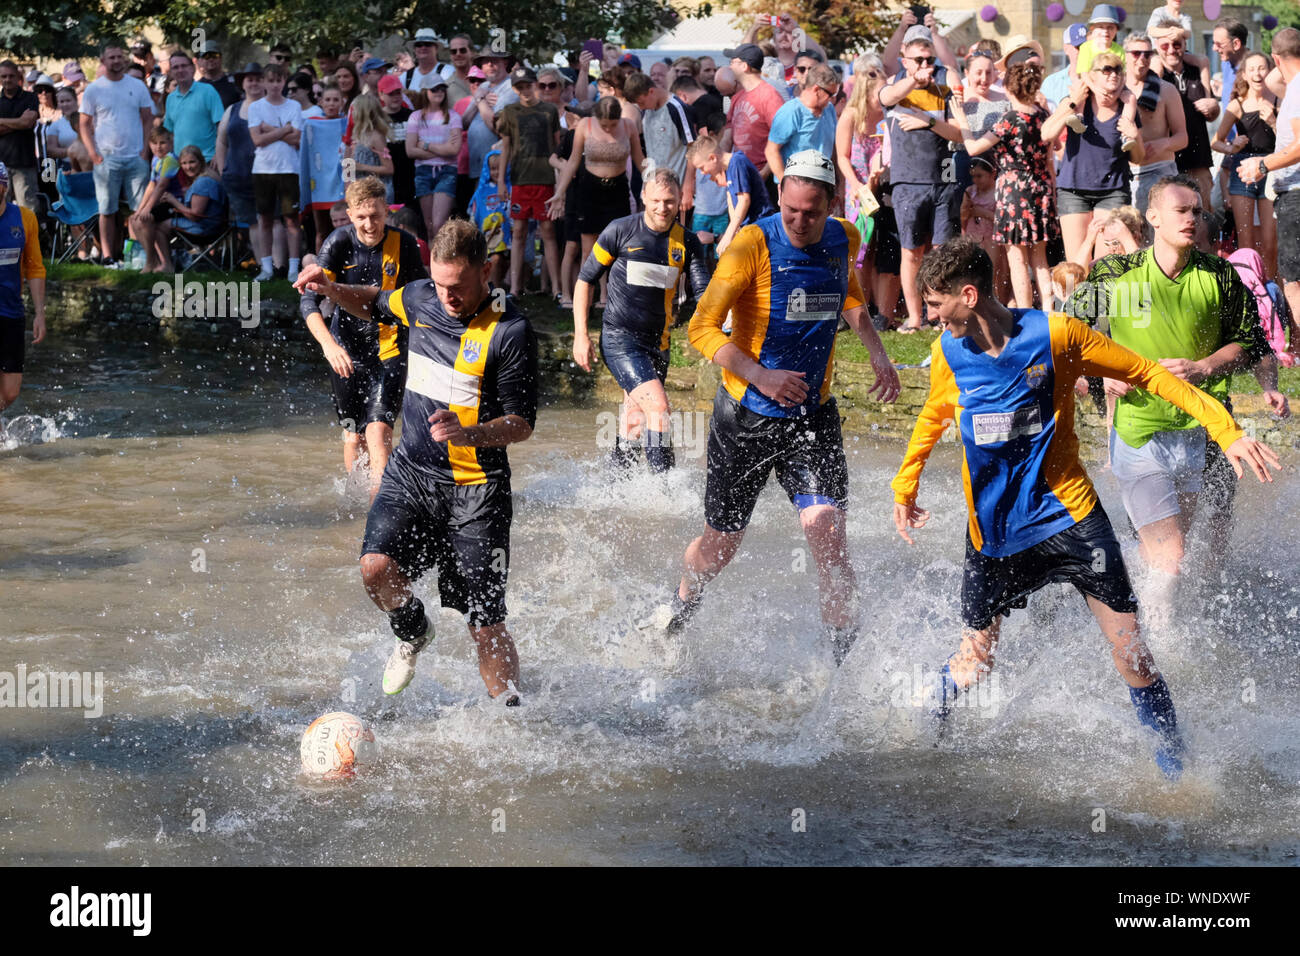 August Bank Holiday festivities in Bourton-on-the Water Gloucestershire UK. The traditional football in the river match. Stock Photo